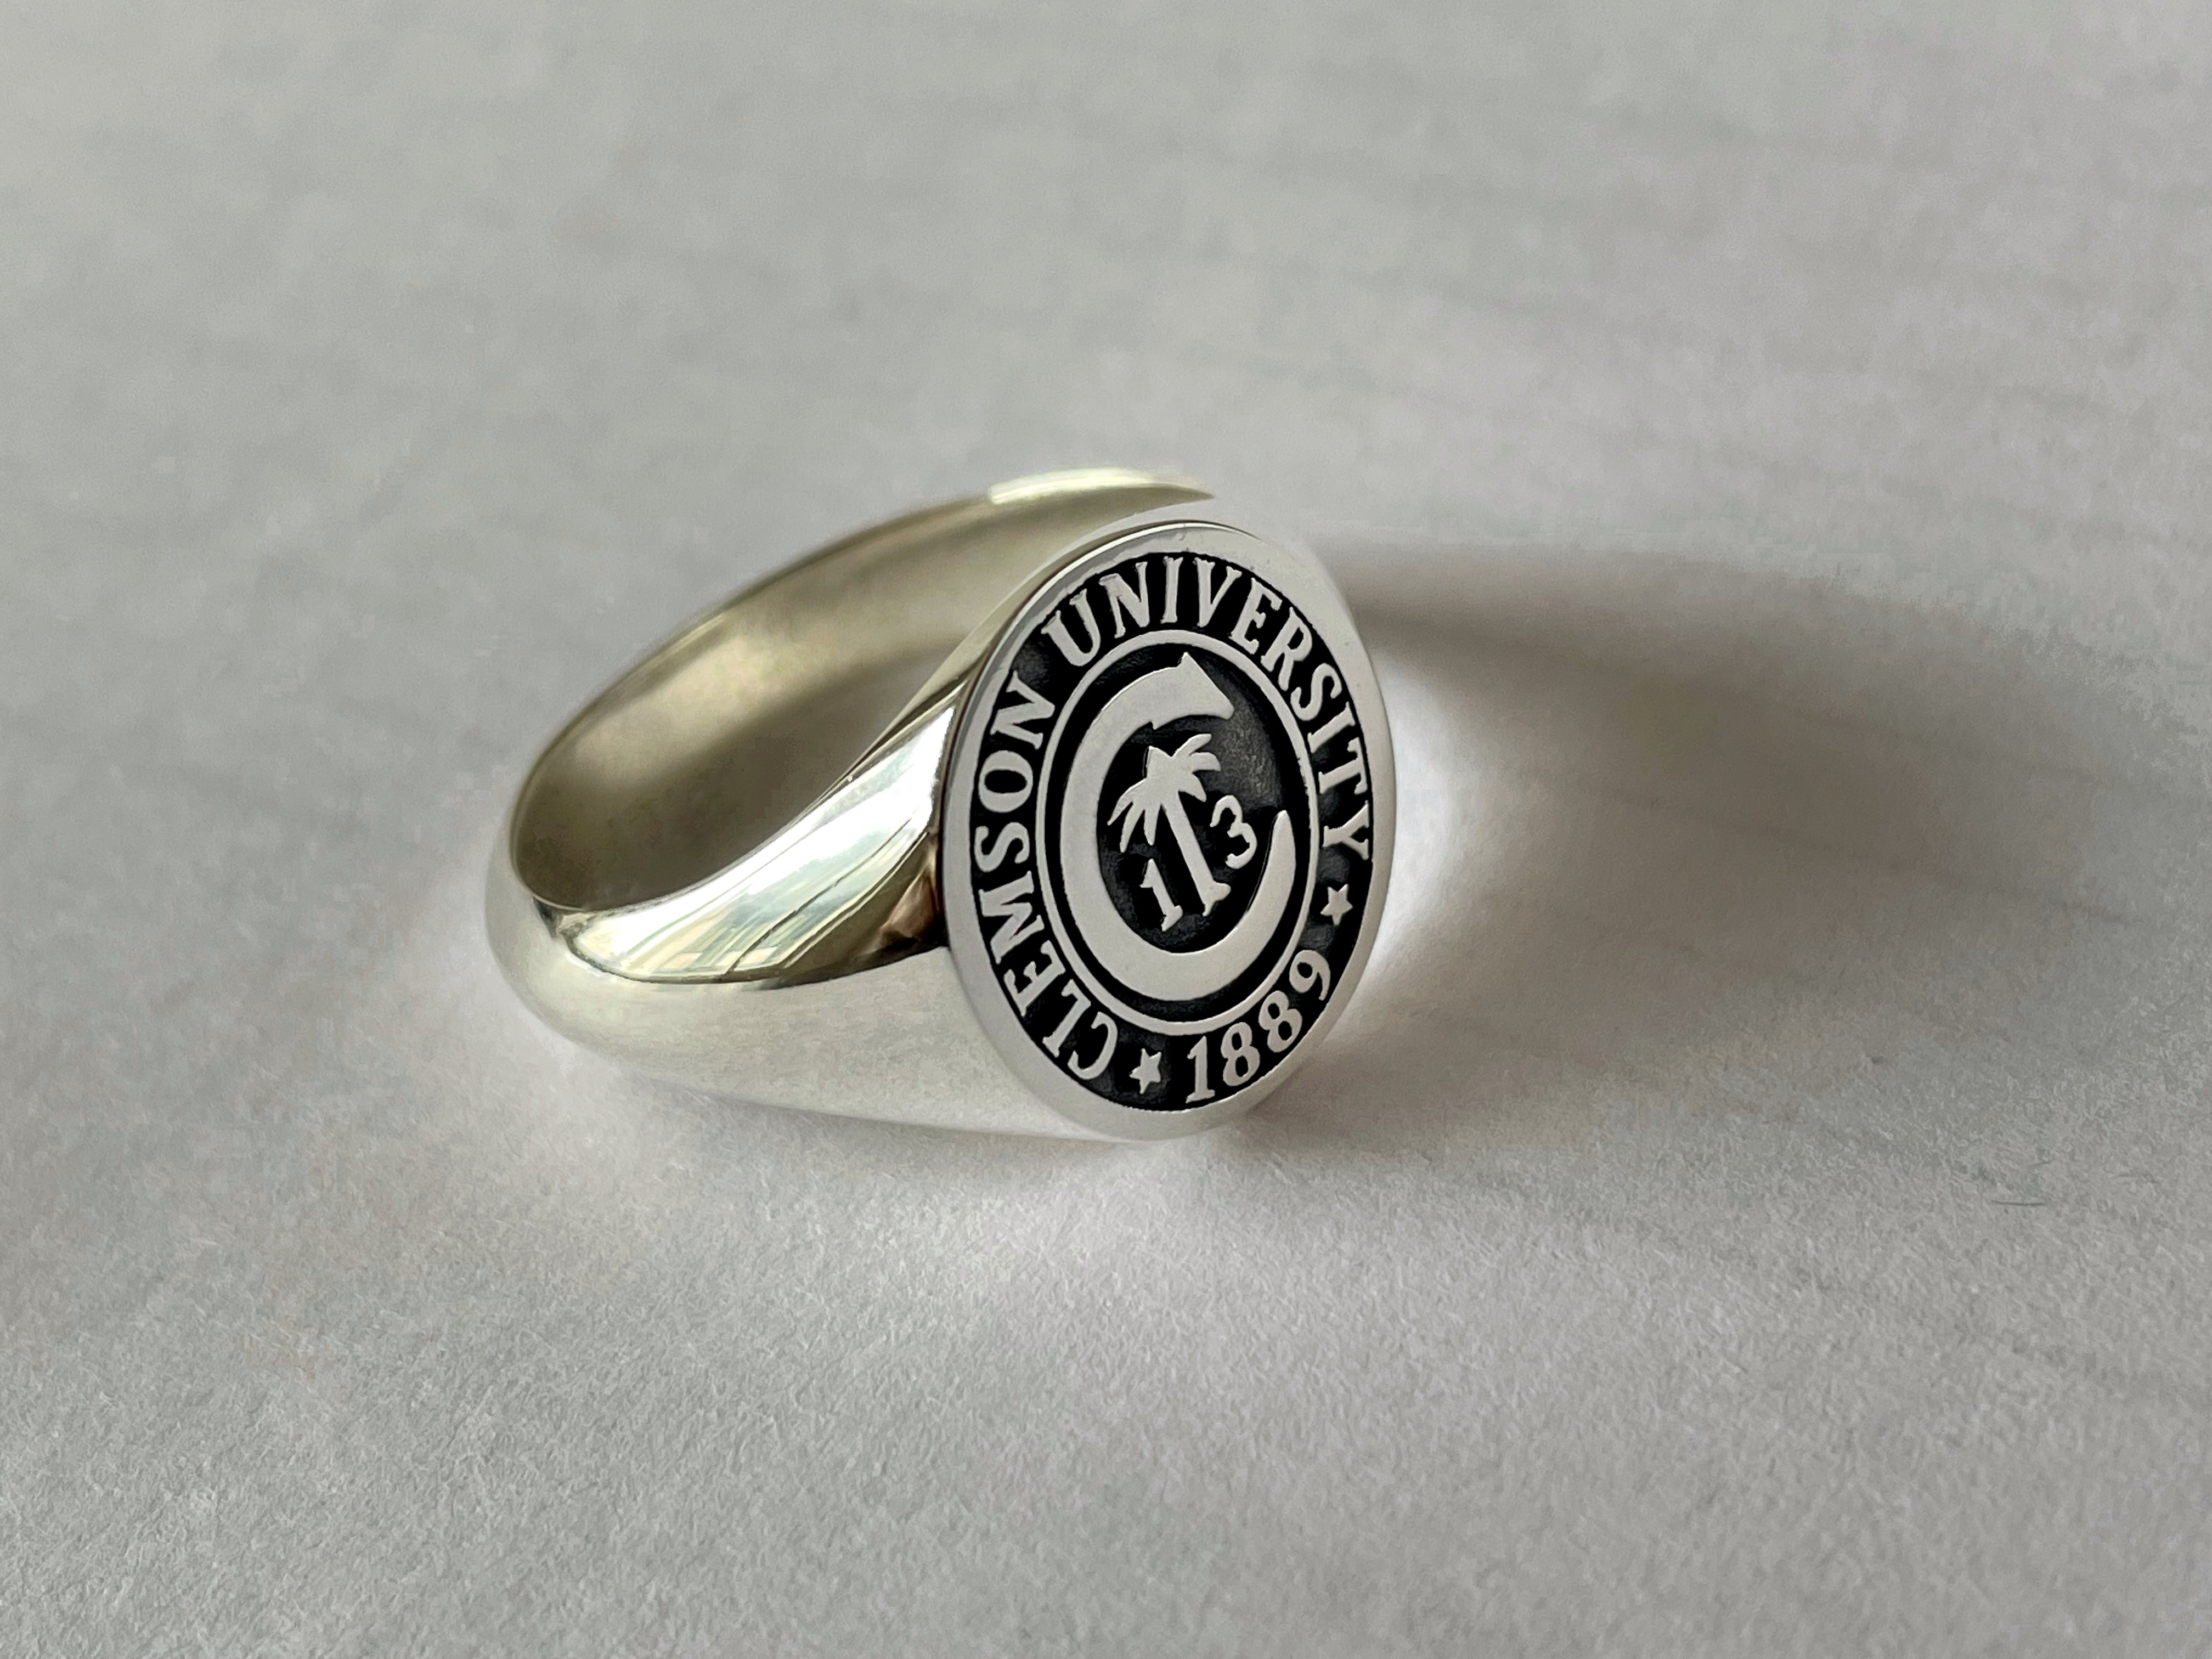 Personalized High School Graduation Band Ring, Class Ring for Men and Women  | eBay